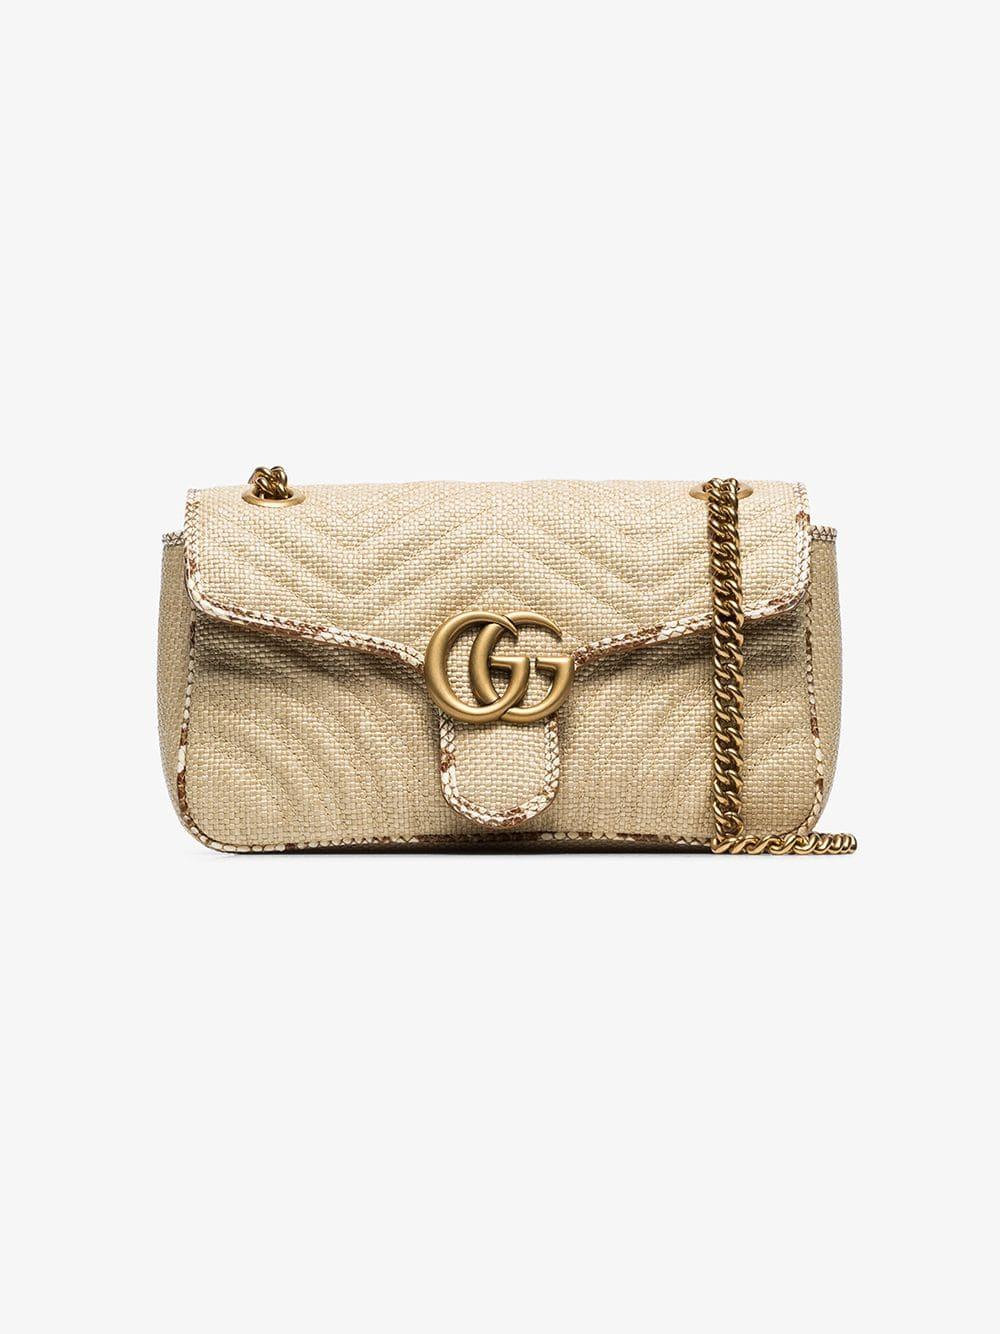 Gucci Beige Marmont Small Straw Shoulder Bag in Natural - Lyst